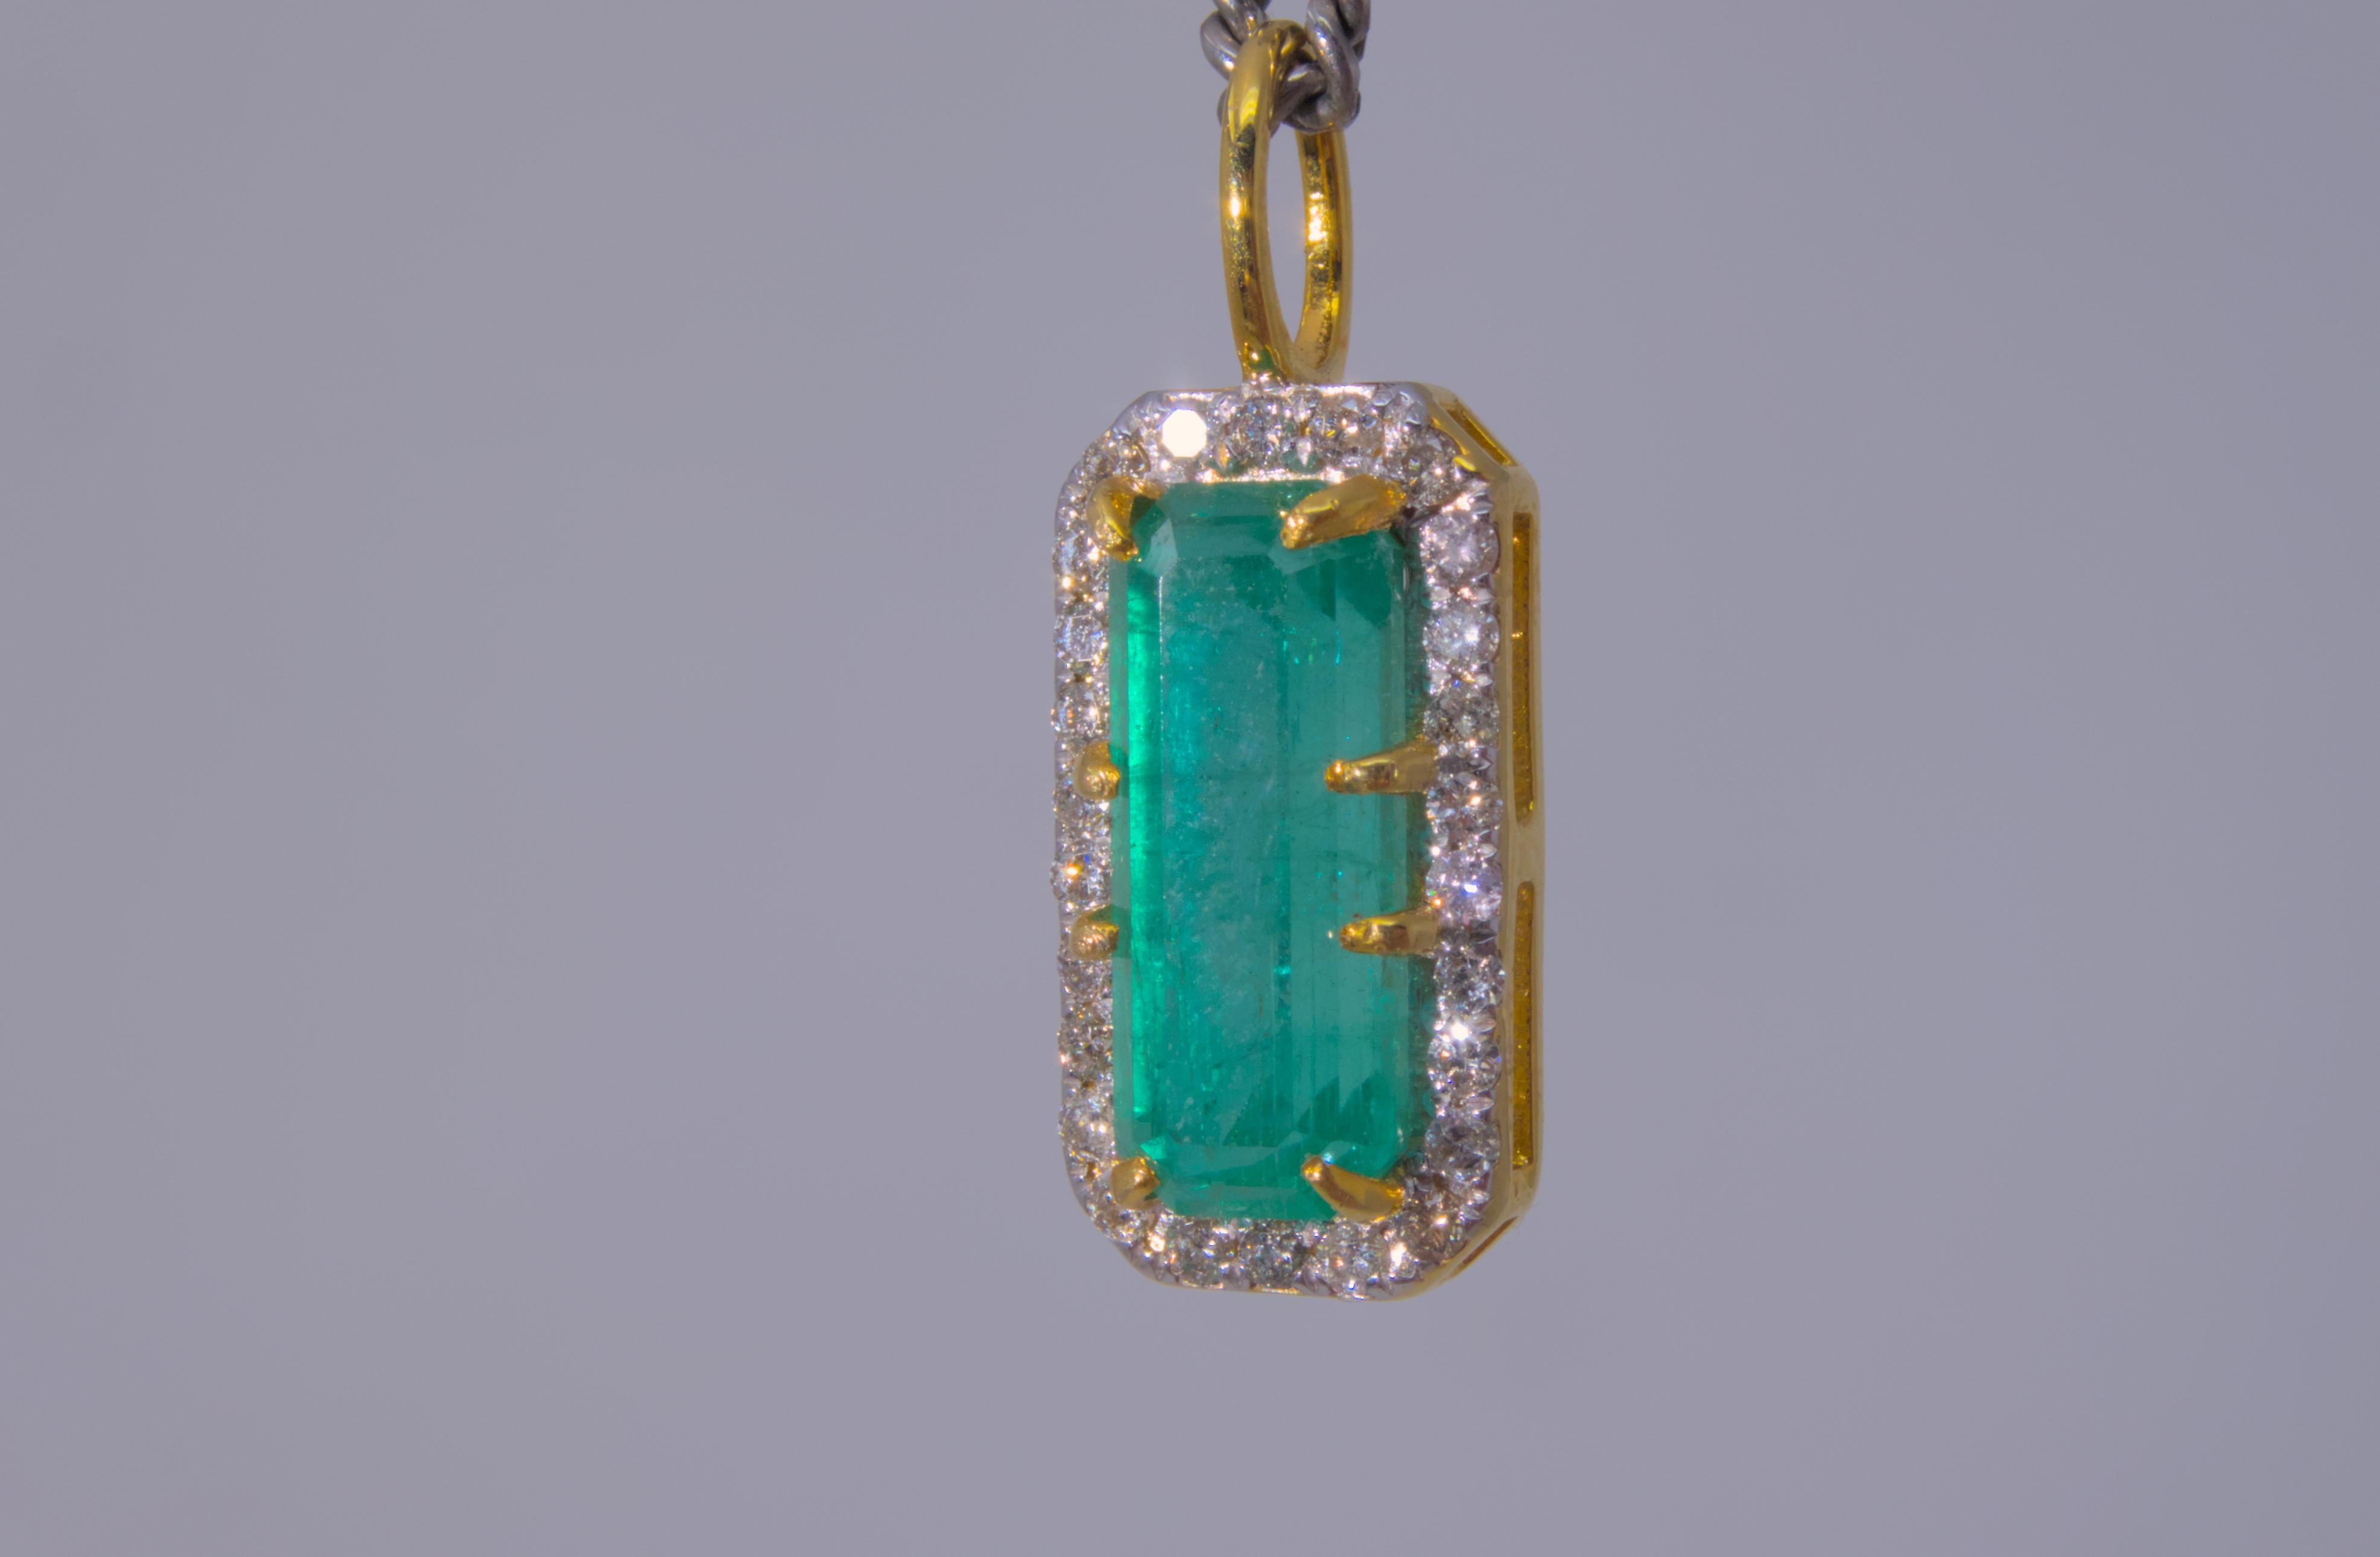 Contemporary Stunning 4.72 Afghan Emerald Pendant with Diamond Halo